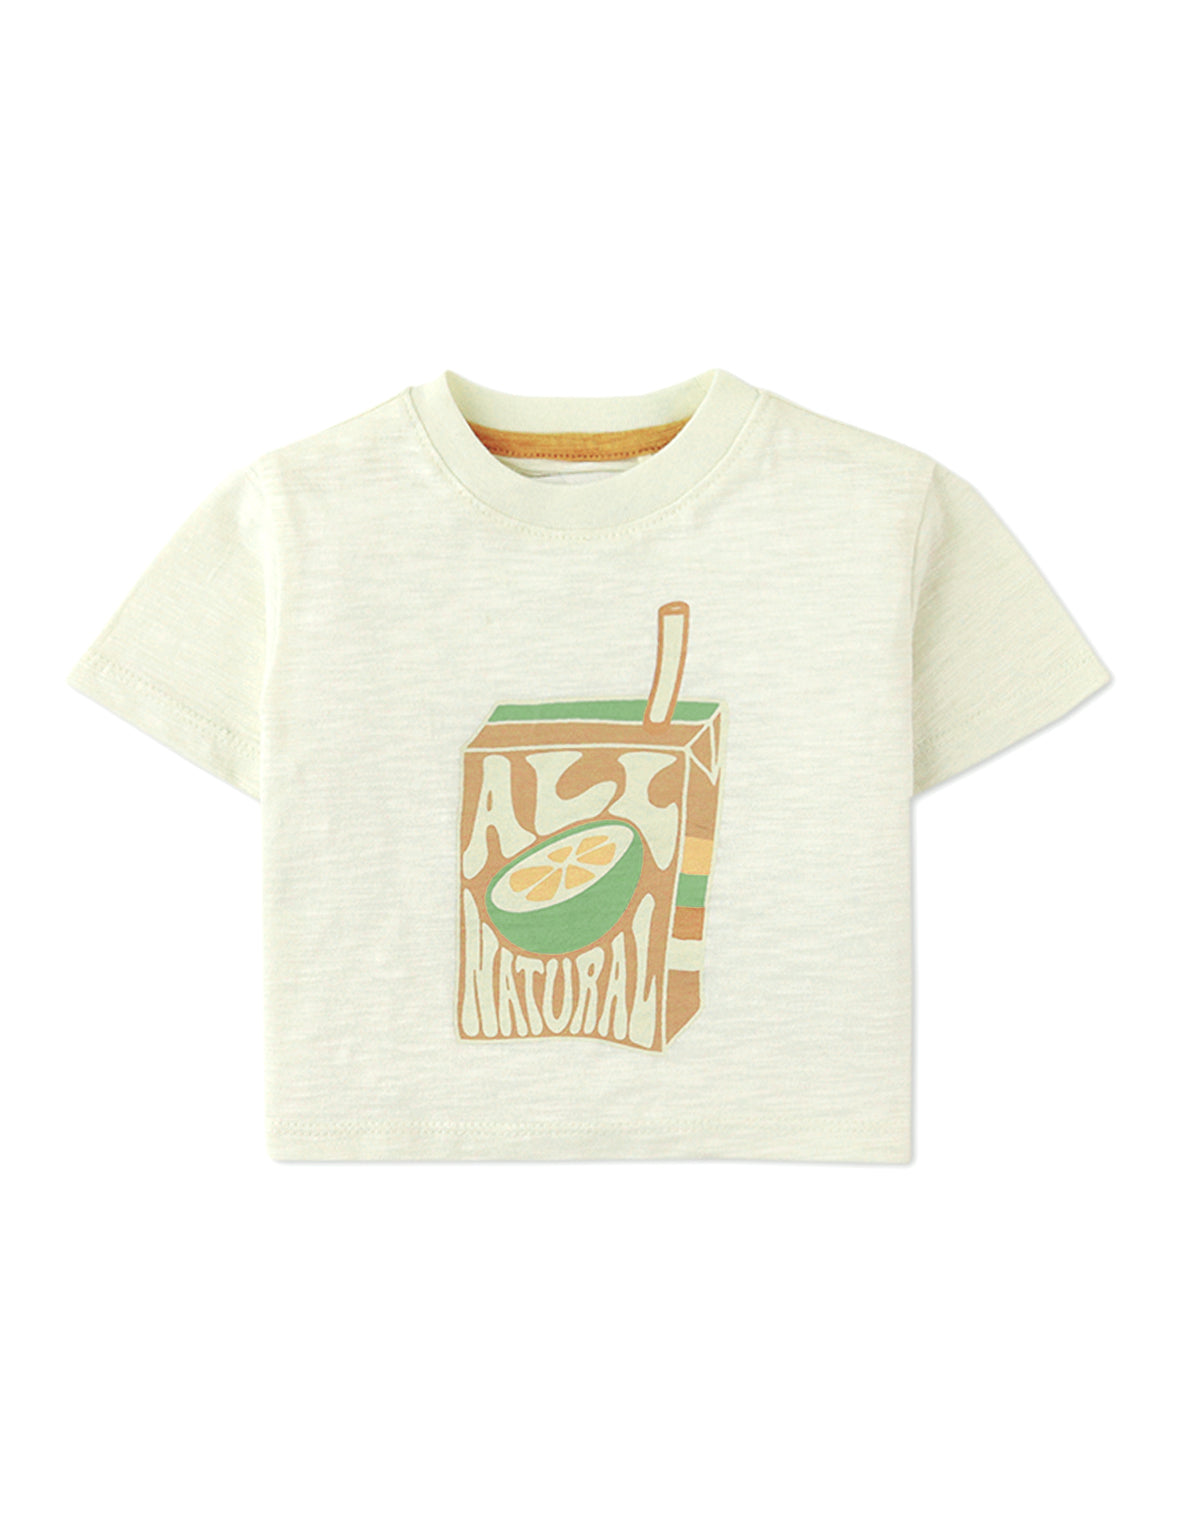 BABY BOYS ALL NATURAL DRINK TEE